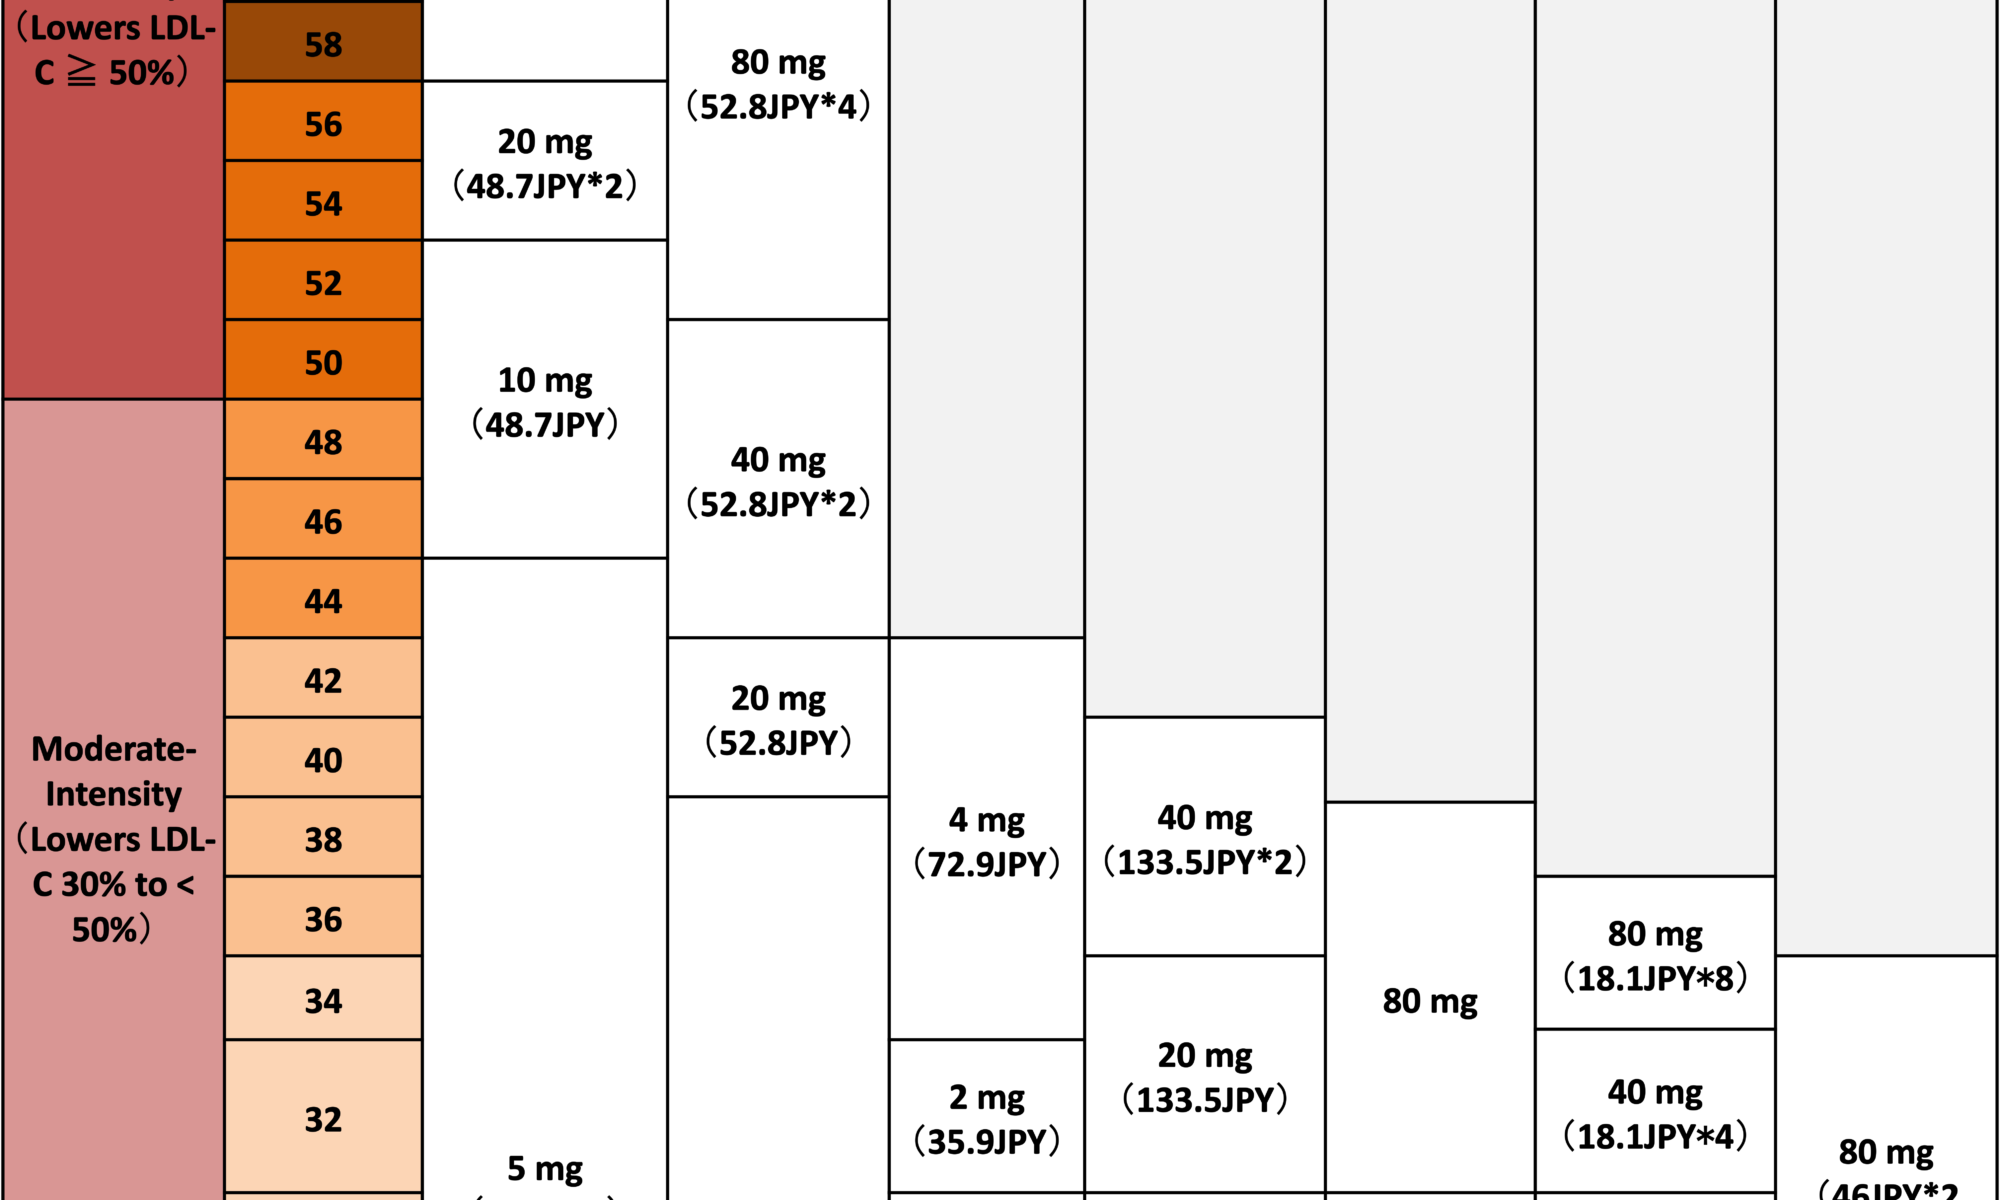 Statin Dose Intensity And Equivalency Chart